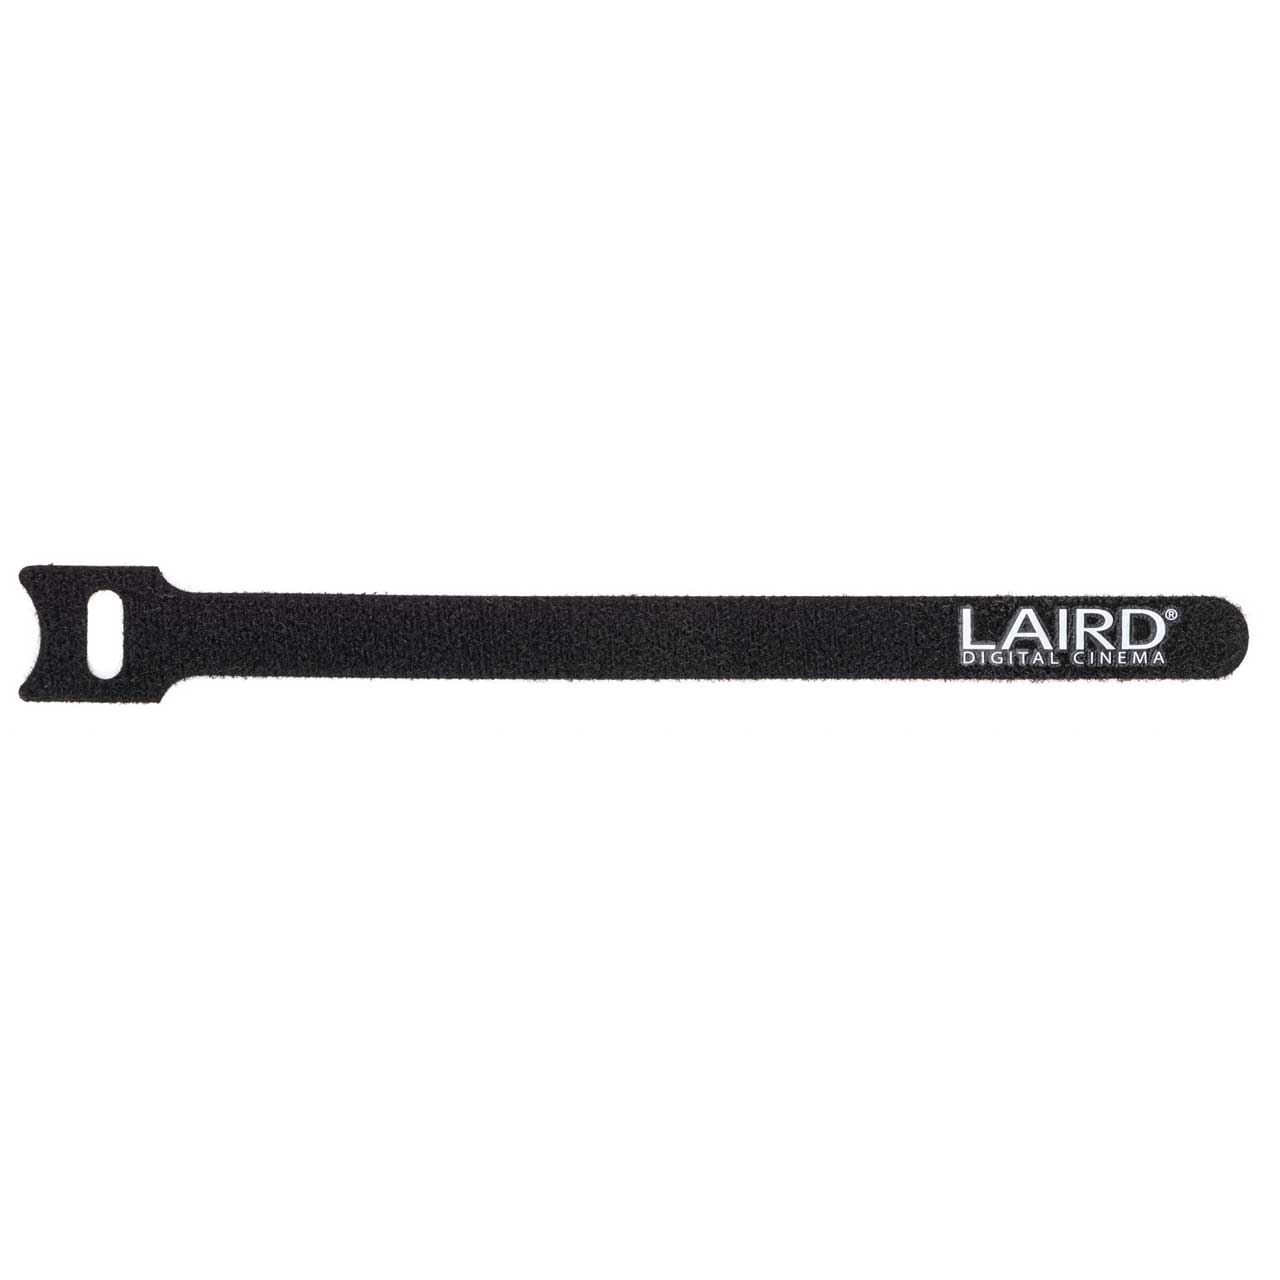 Laird Hook and Loop Cable Wrap 12mm x 180mm Black with White Logo - 50 Pack LDC-HKNLP-50PK